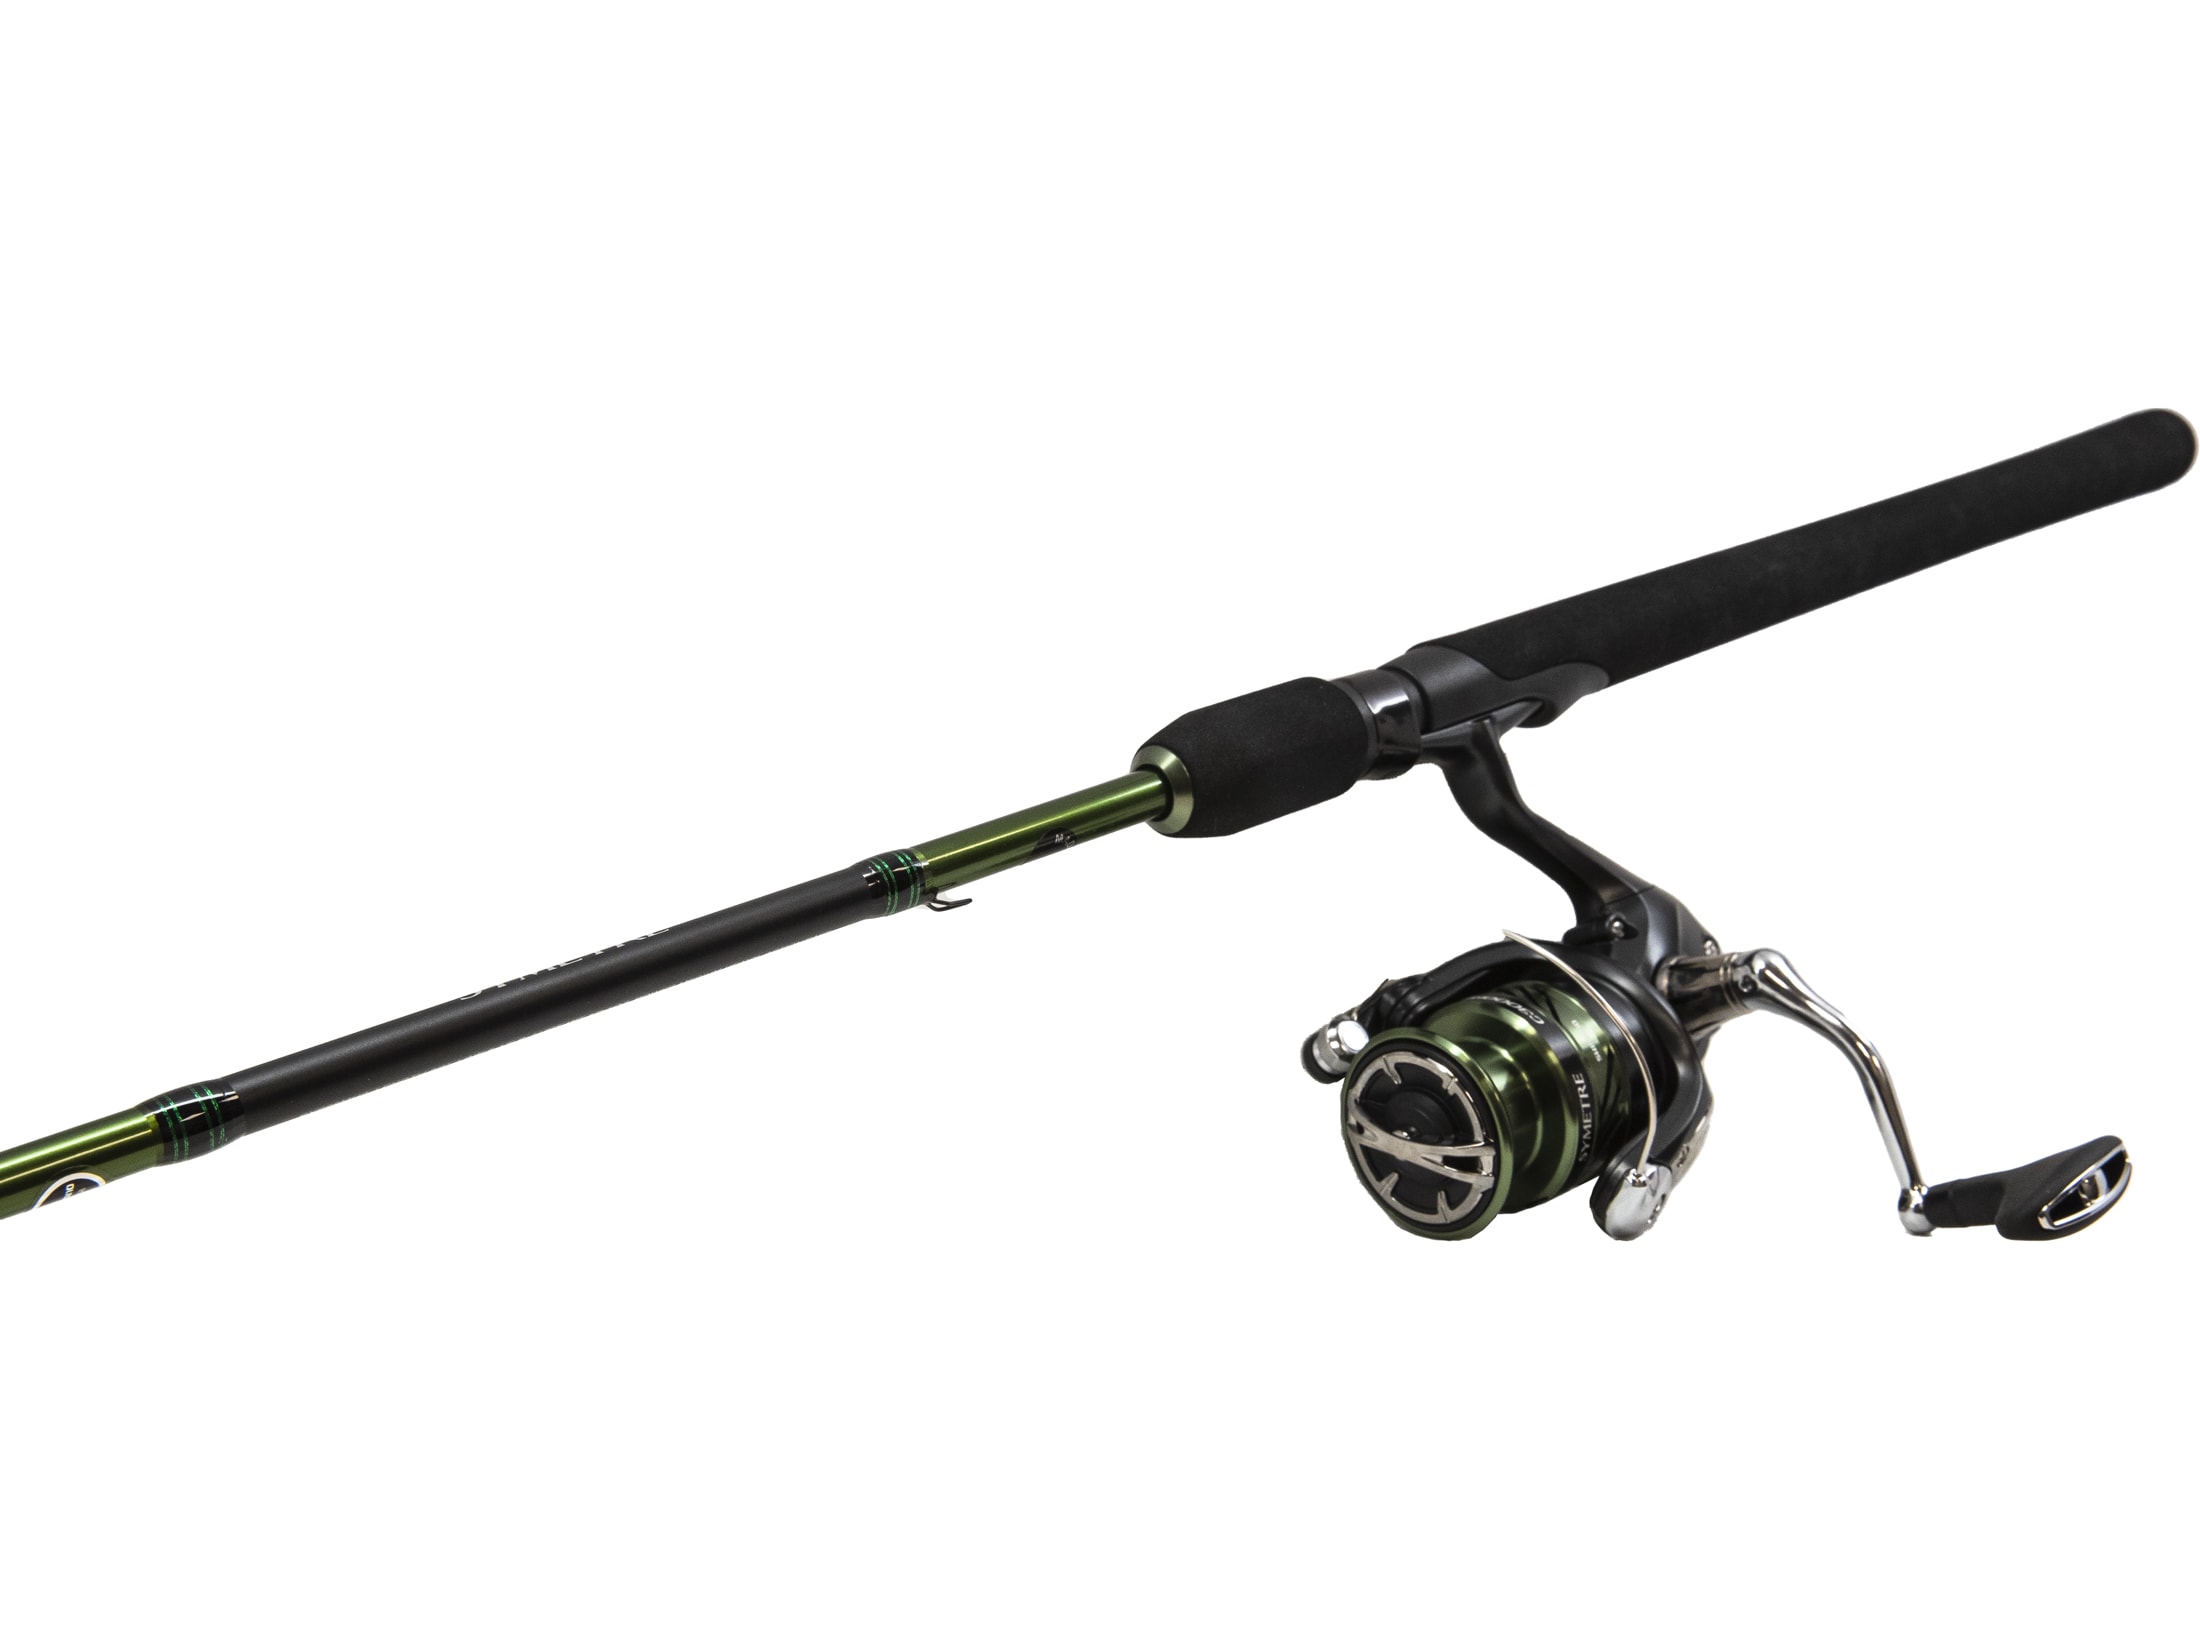 best spinning rod and reel combo for salmon - Today's Deals - Up